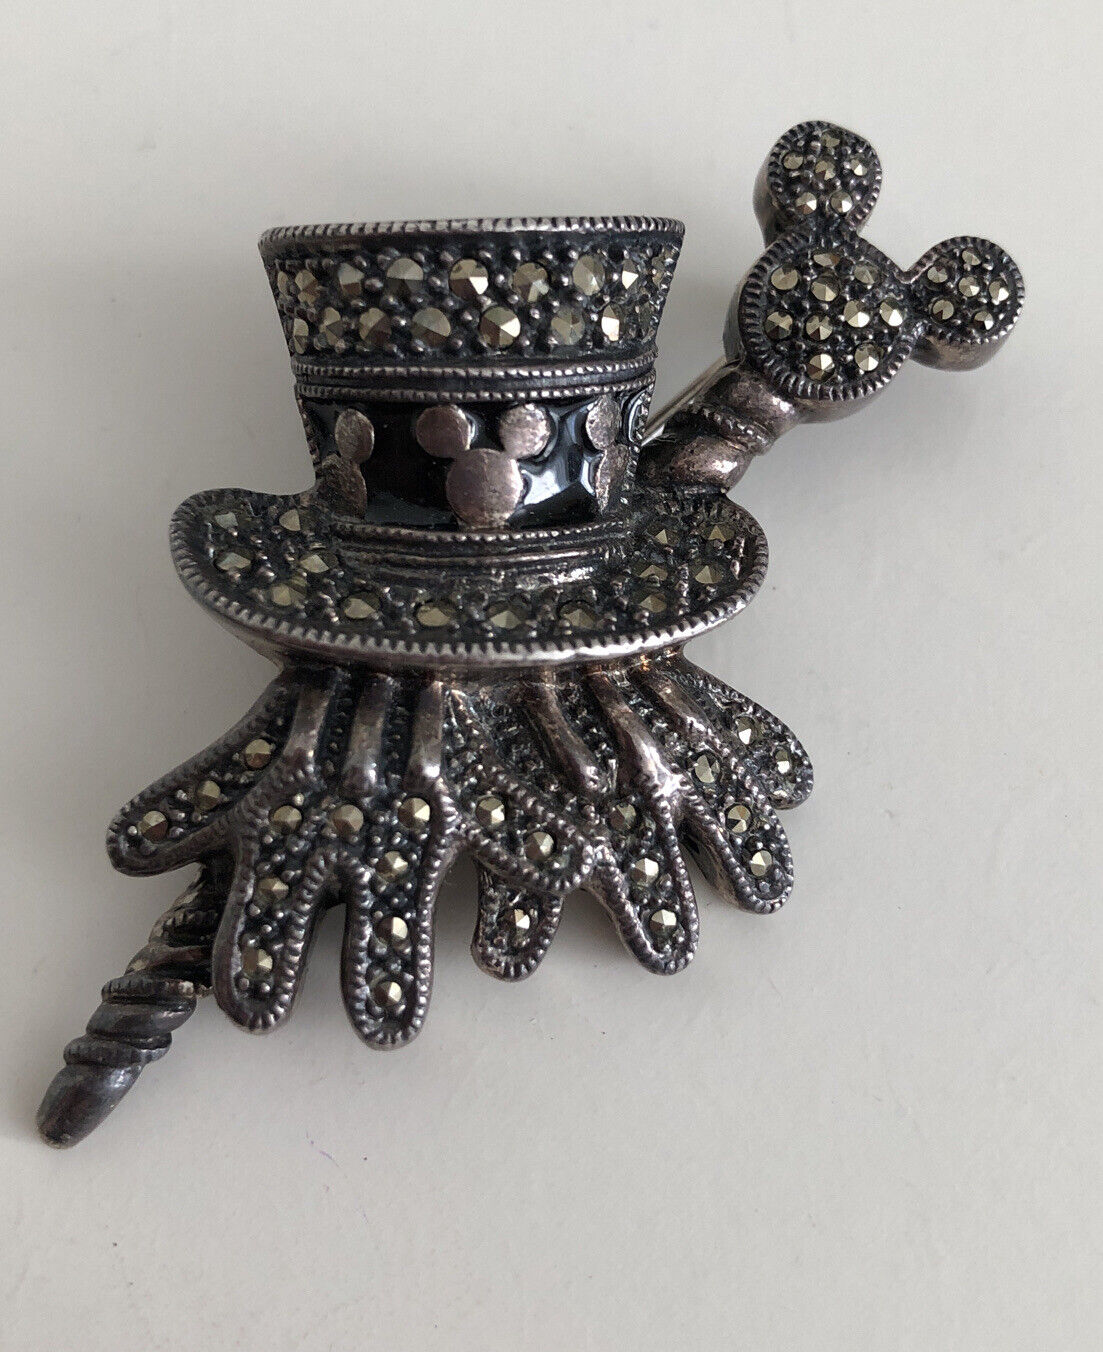 DISNEY VINTAGE BROOCH. MICKEY MOUSE TOP HAT, GLOVES AND CANE, MARCASITE